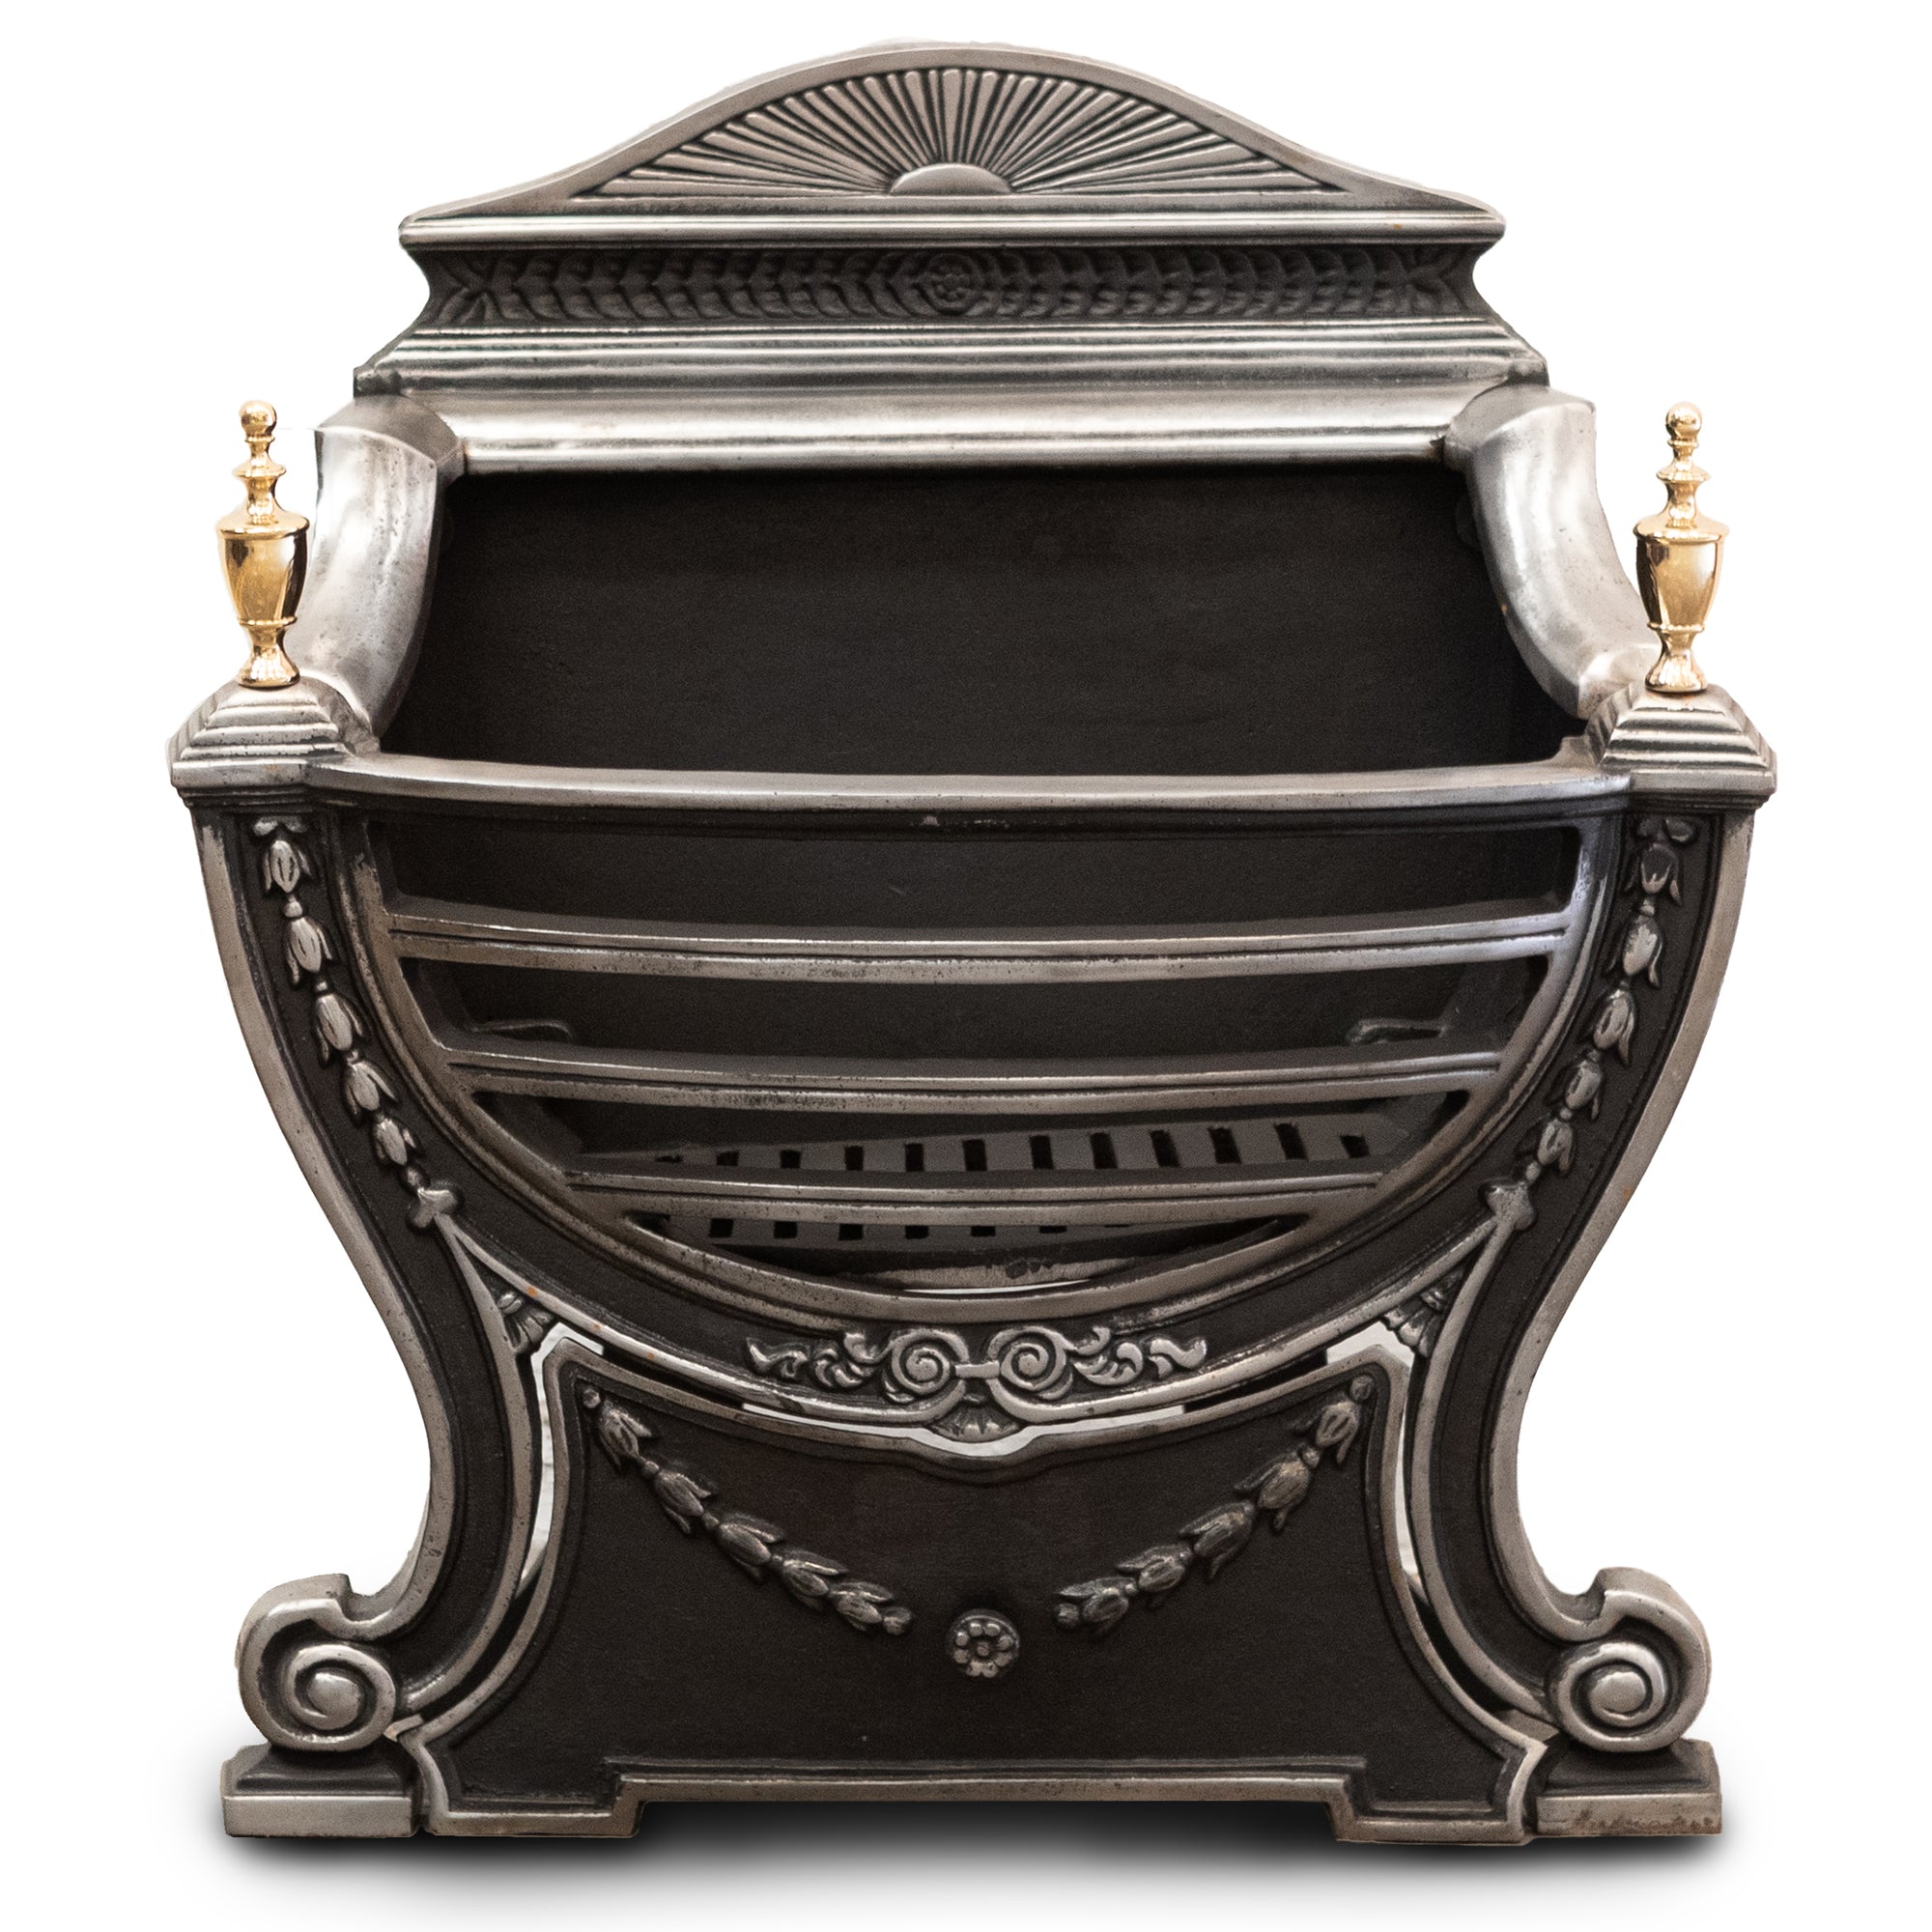 Reclaimed Victorian Style Cast Iron Fire Basket with Finials | The Architectural Forum